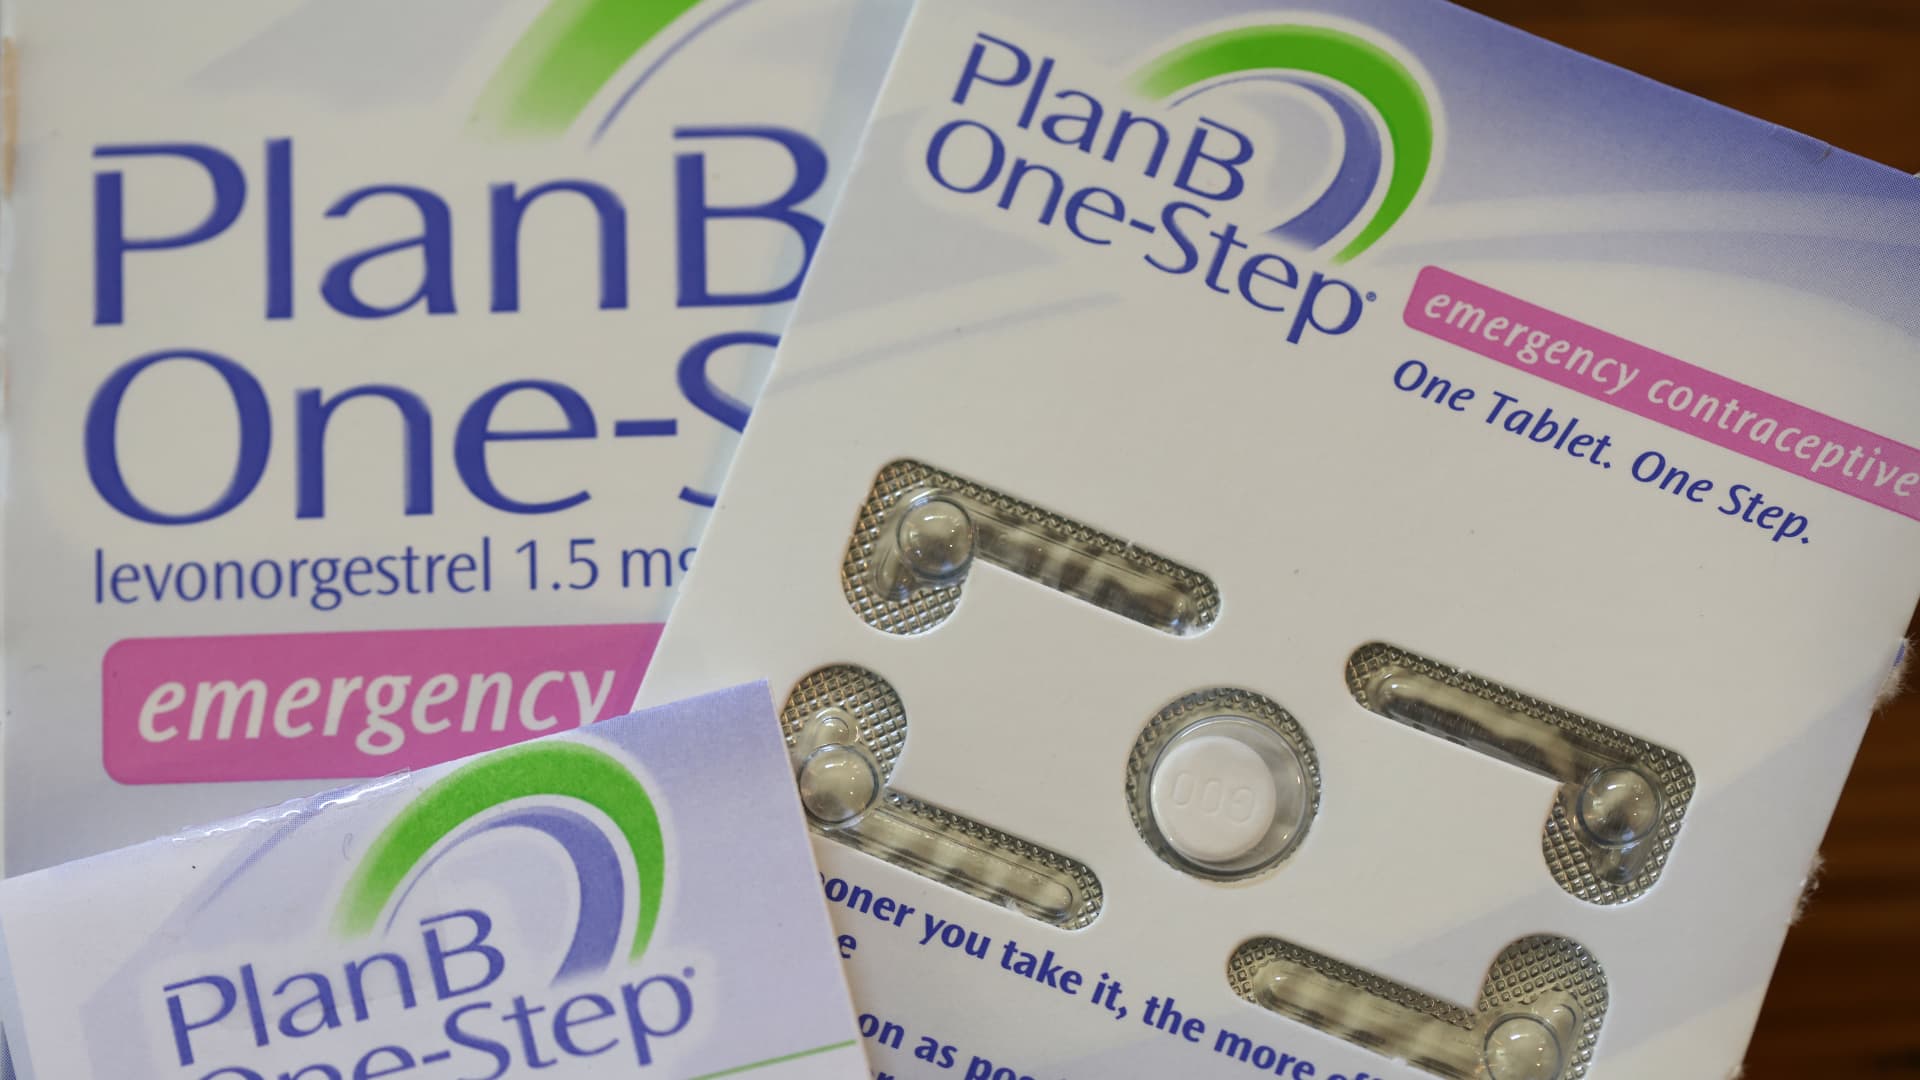 FDA changes Plan B packaging to clarify that it is not an abortion pill